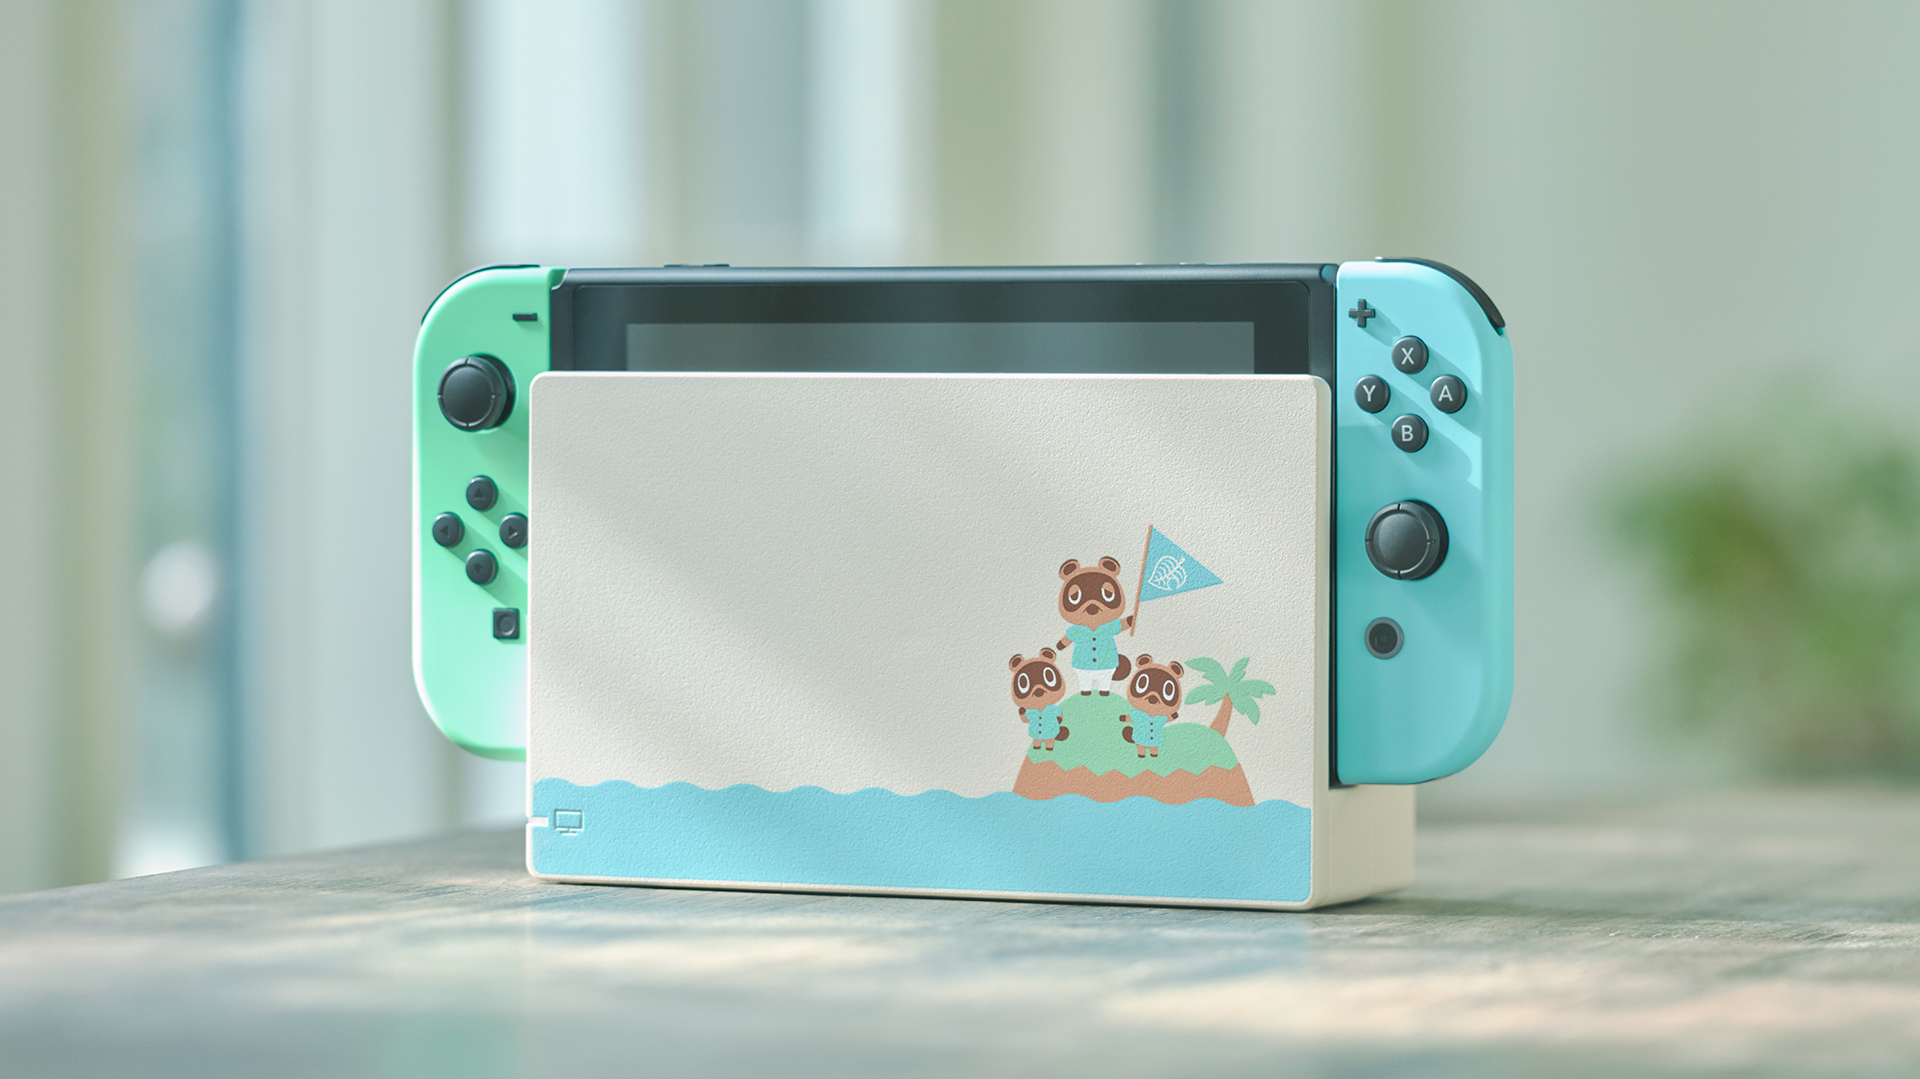 Nintendo reveals Animal Crossing New Horizons-themed Switch for